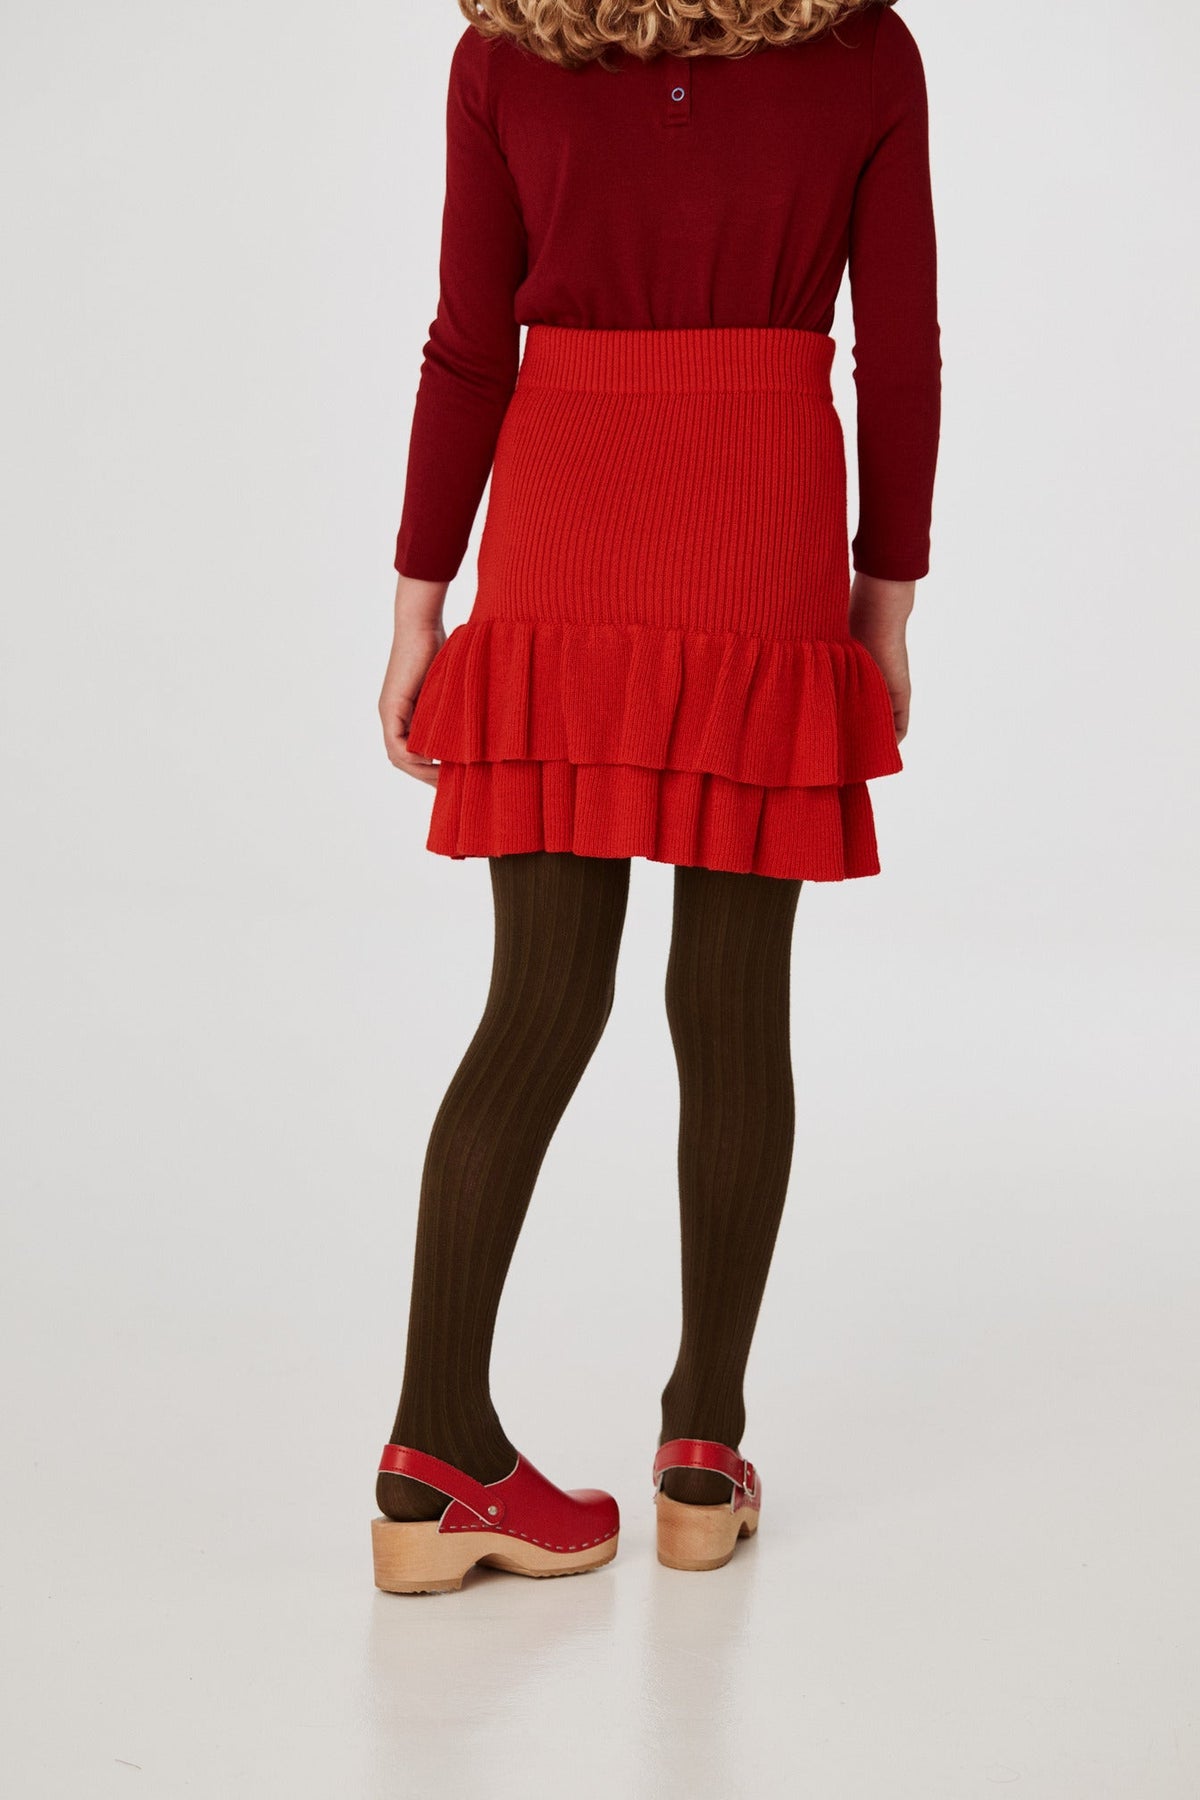 Block Party Skirt - Red Flame+Model is 53 inches tall, 58lbs, wearing a size 7-8y